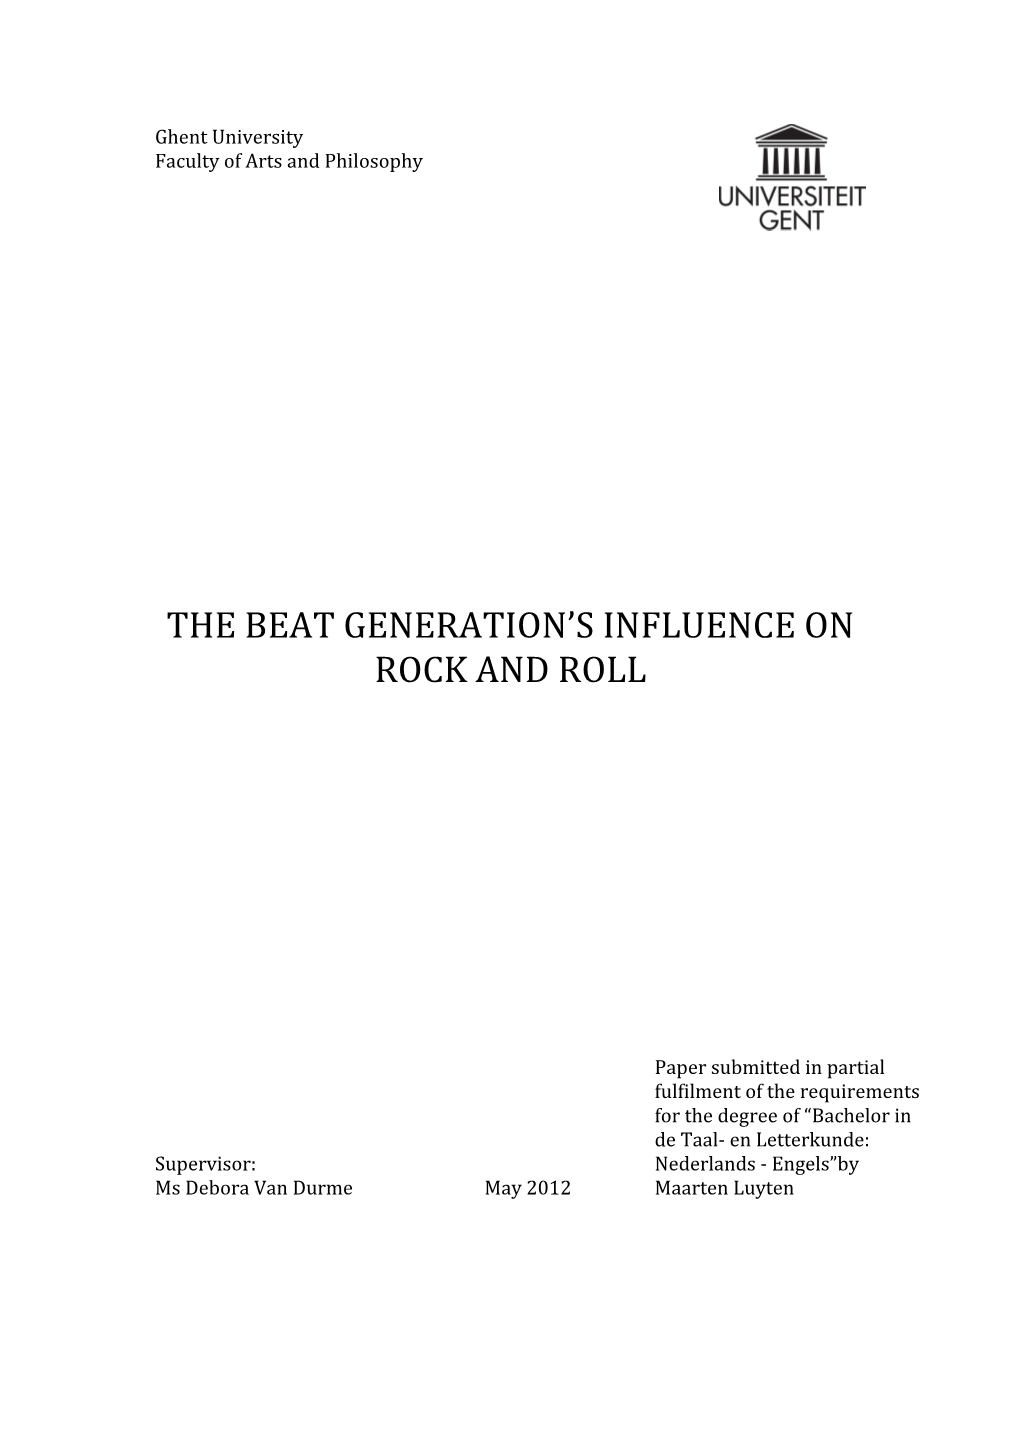 The Beat Generation's Influence on Rock and Roll